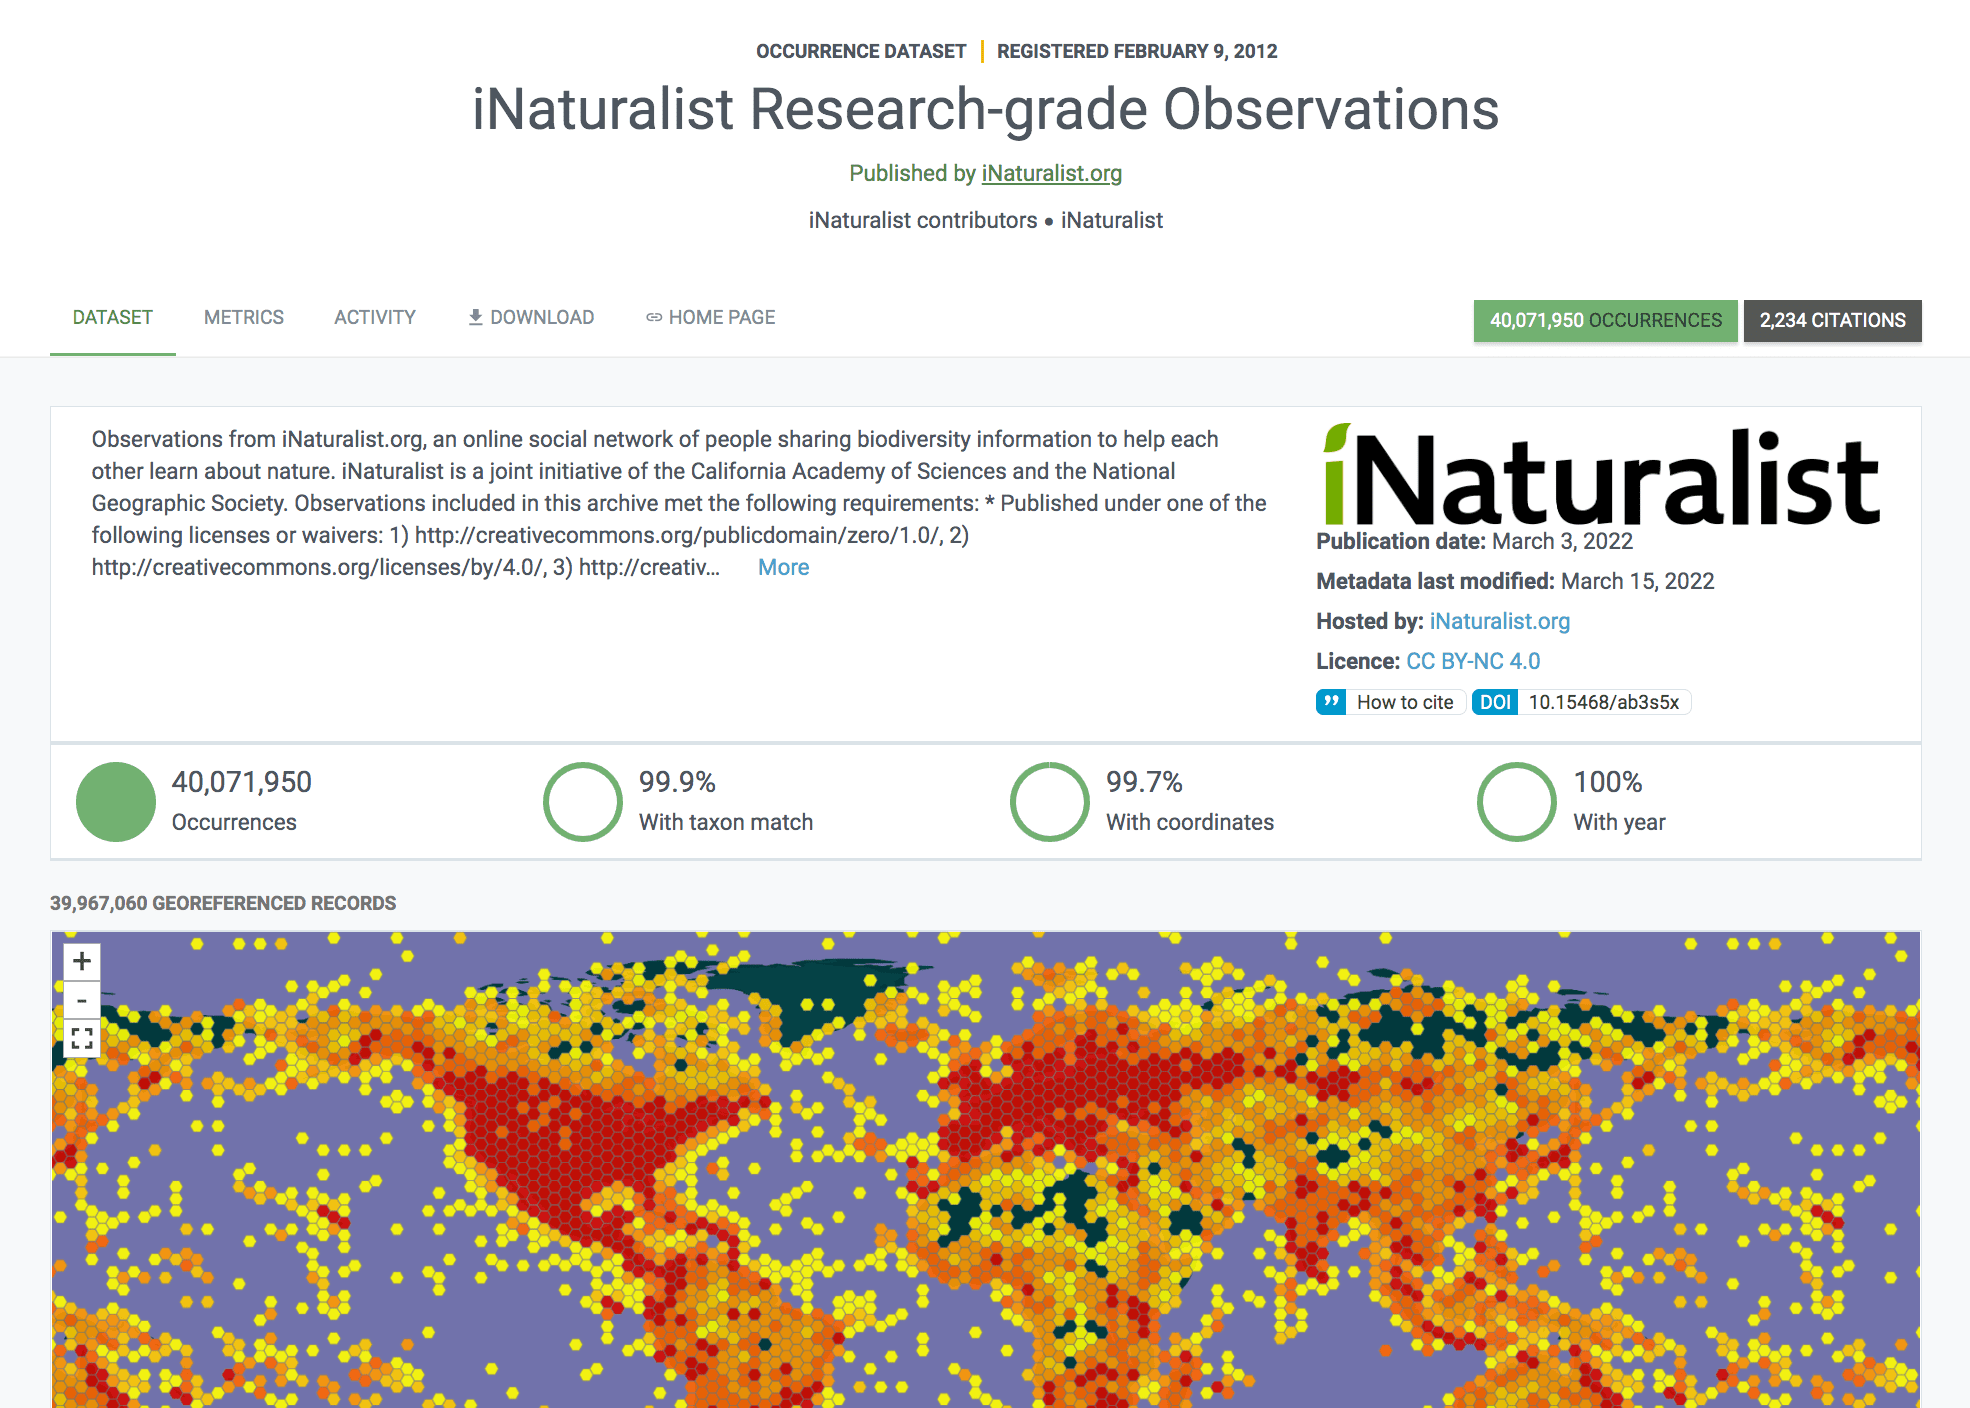 The iNaturalist data set page, titled “iNaturalist Research-grade Observations”. The page shows the number of occurrences recorded in the data set and a map of locations where species have been observed.